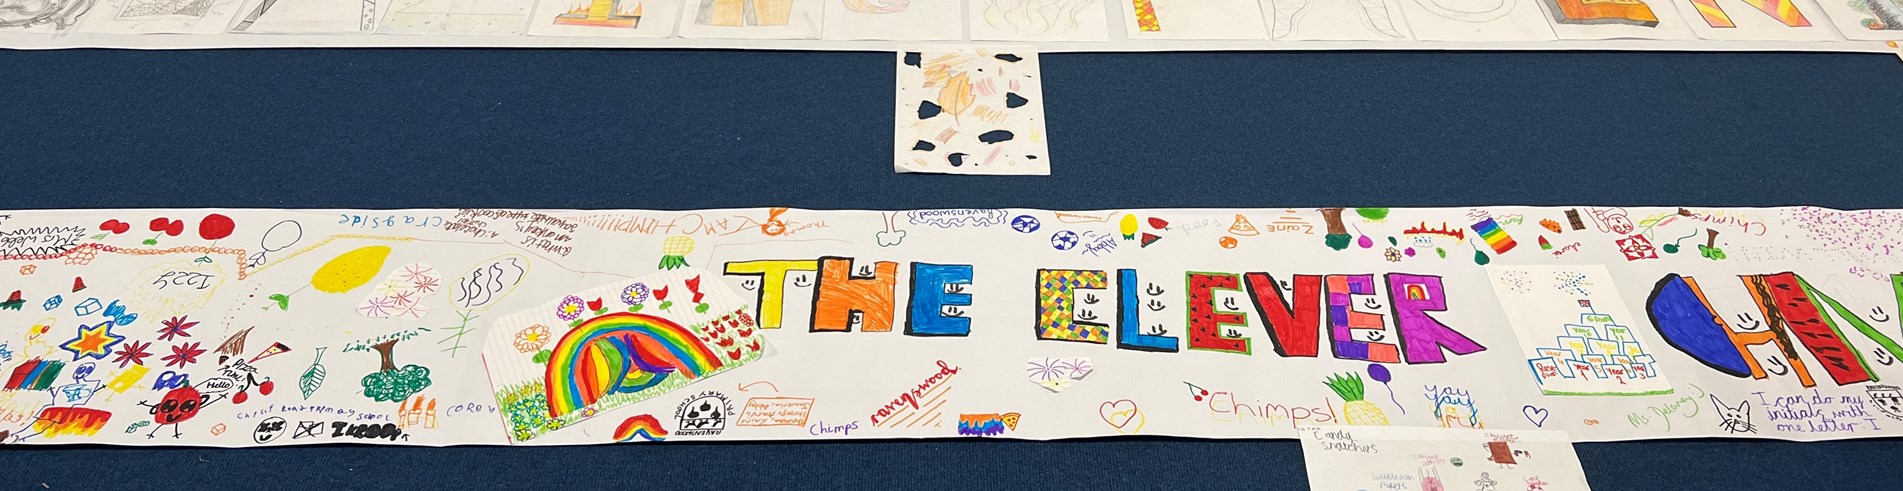 Year 6-7 Summer School Diversity themed banners (1)